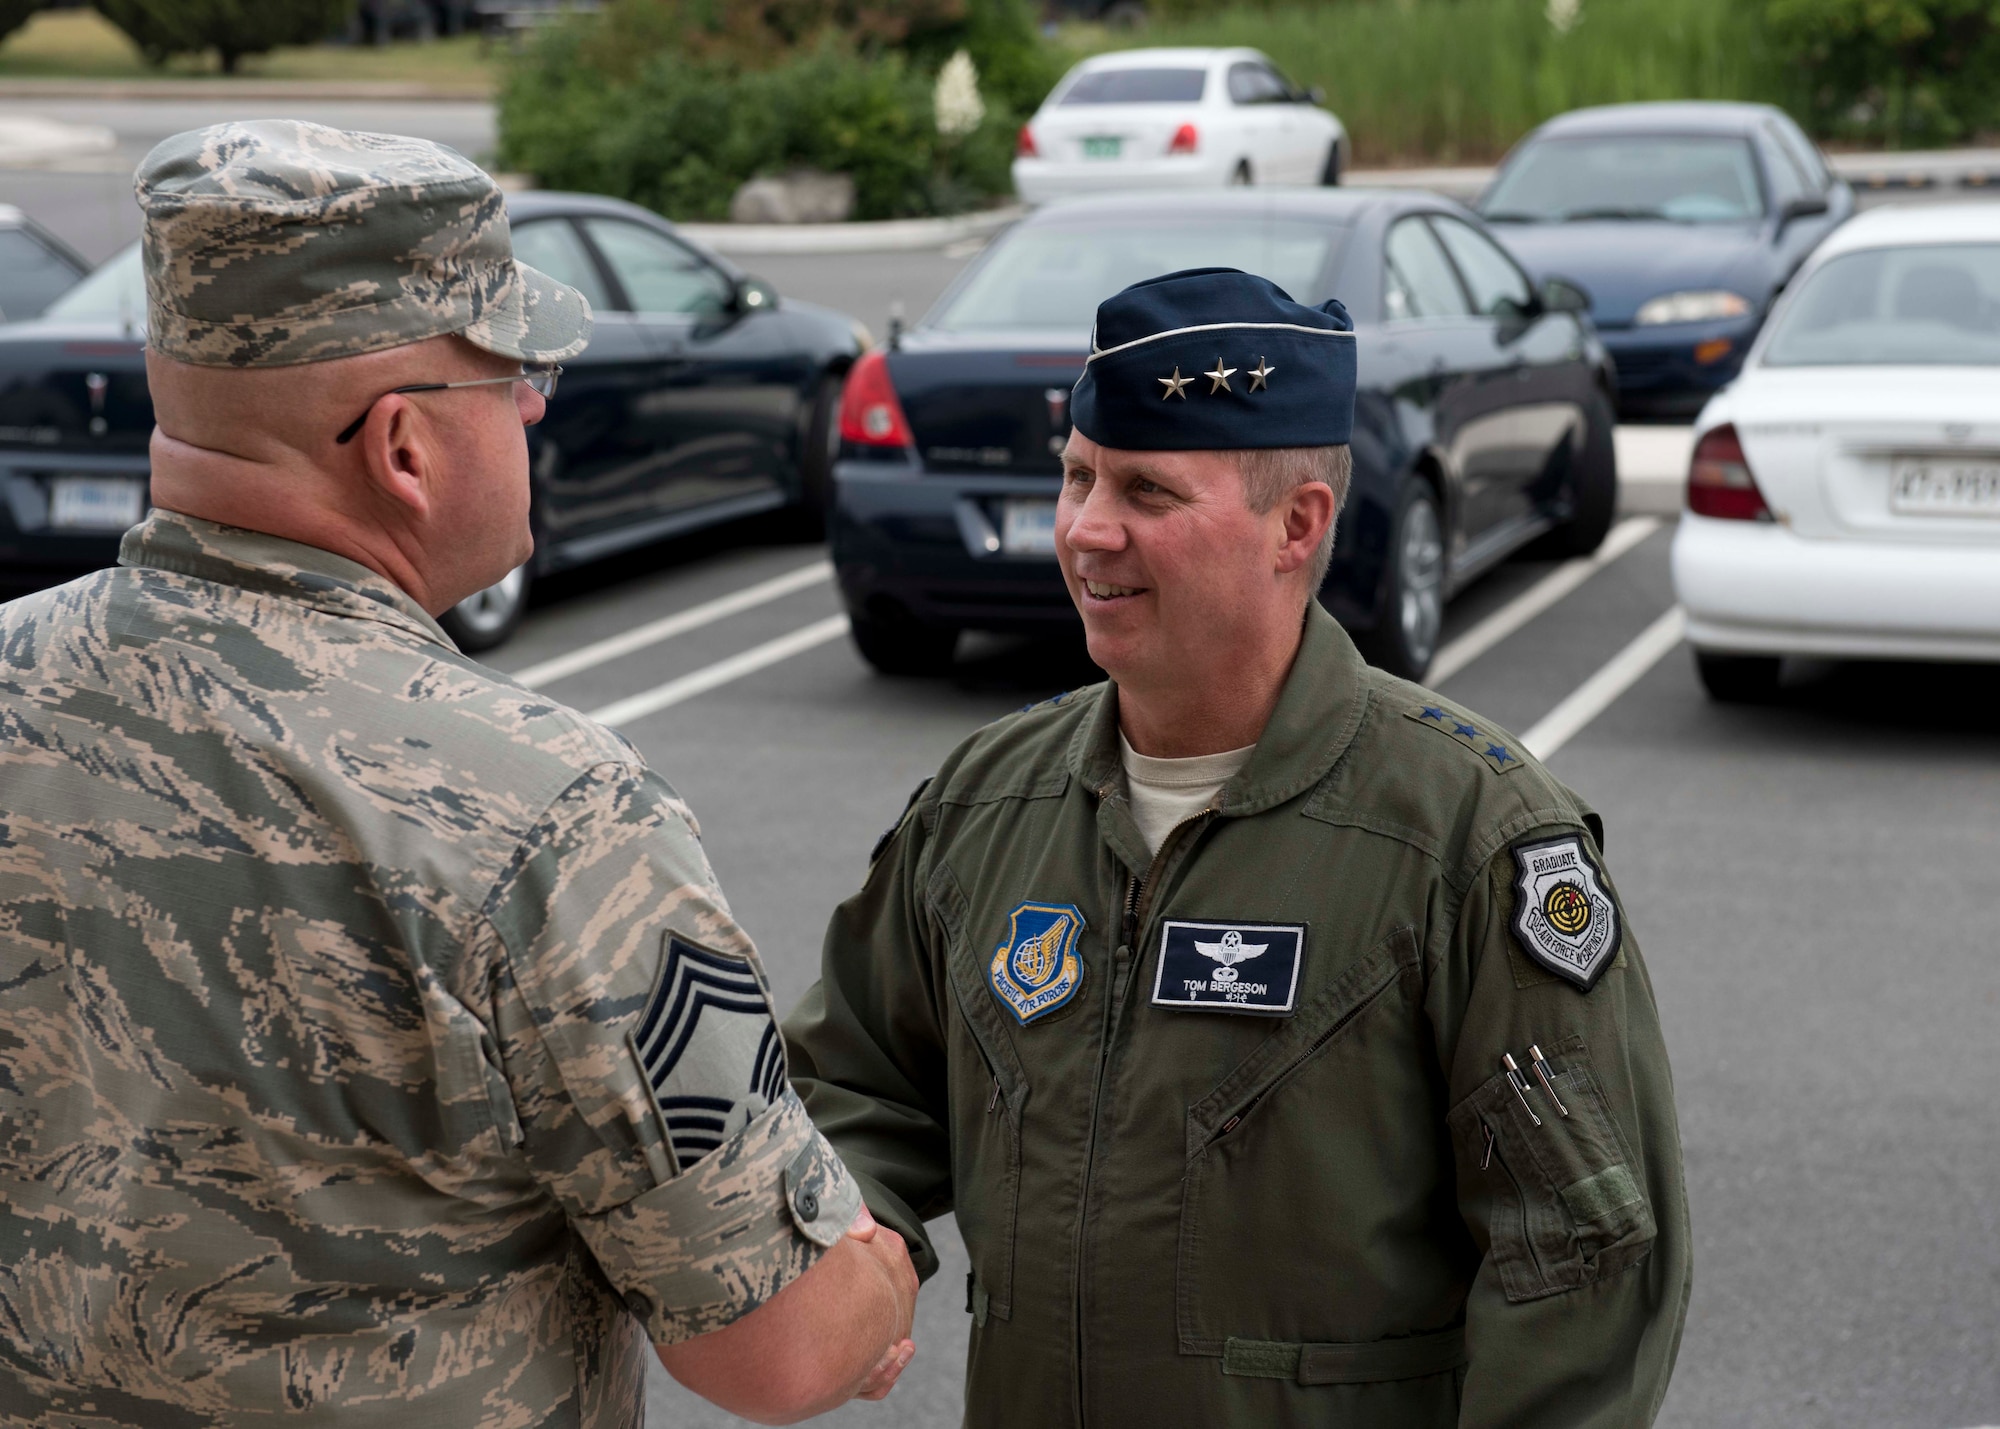 Chief Master Sgt. Robert Baker, Chief Enlisted Manager from the 8th Communication Squadron, welcomes Lt. Gen. Thomas Bergeson, 7th Air Force commander, to Kunsan Air Base, Republic of Korea, June 22, 2018. While at Kunsan, Bergeson met with the Wolf Pack’s top enlisted leaders and visited Airmen. (U.S. Air Force photo by Staff Sgt. Levi Rowse)